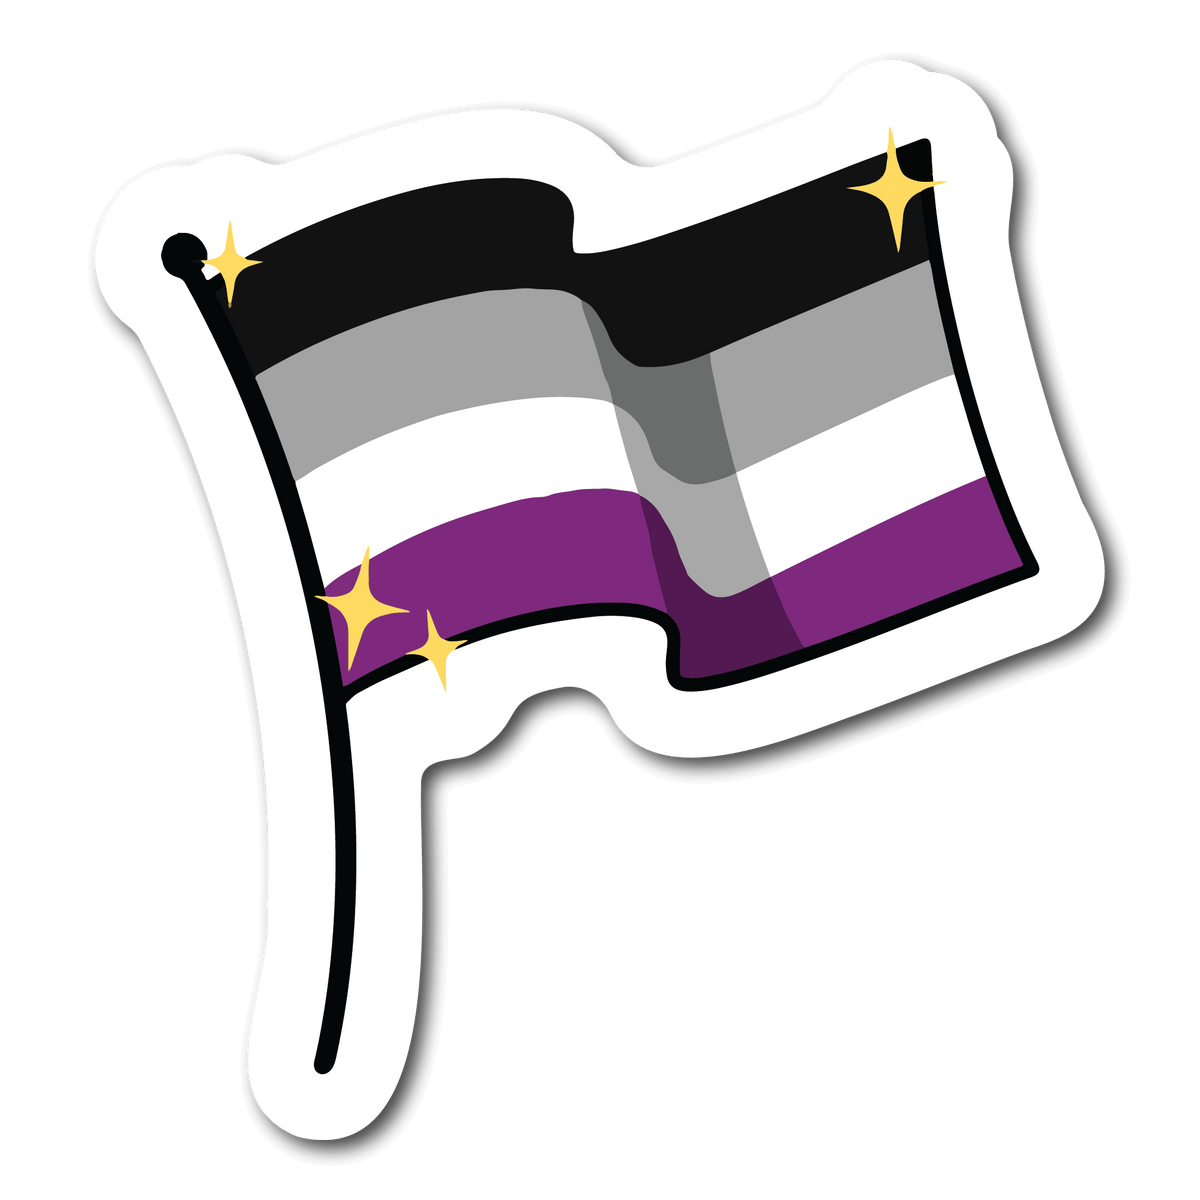 Small Asexual Pride Flag Waterproof Sticker for LGBTQ Name Tags